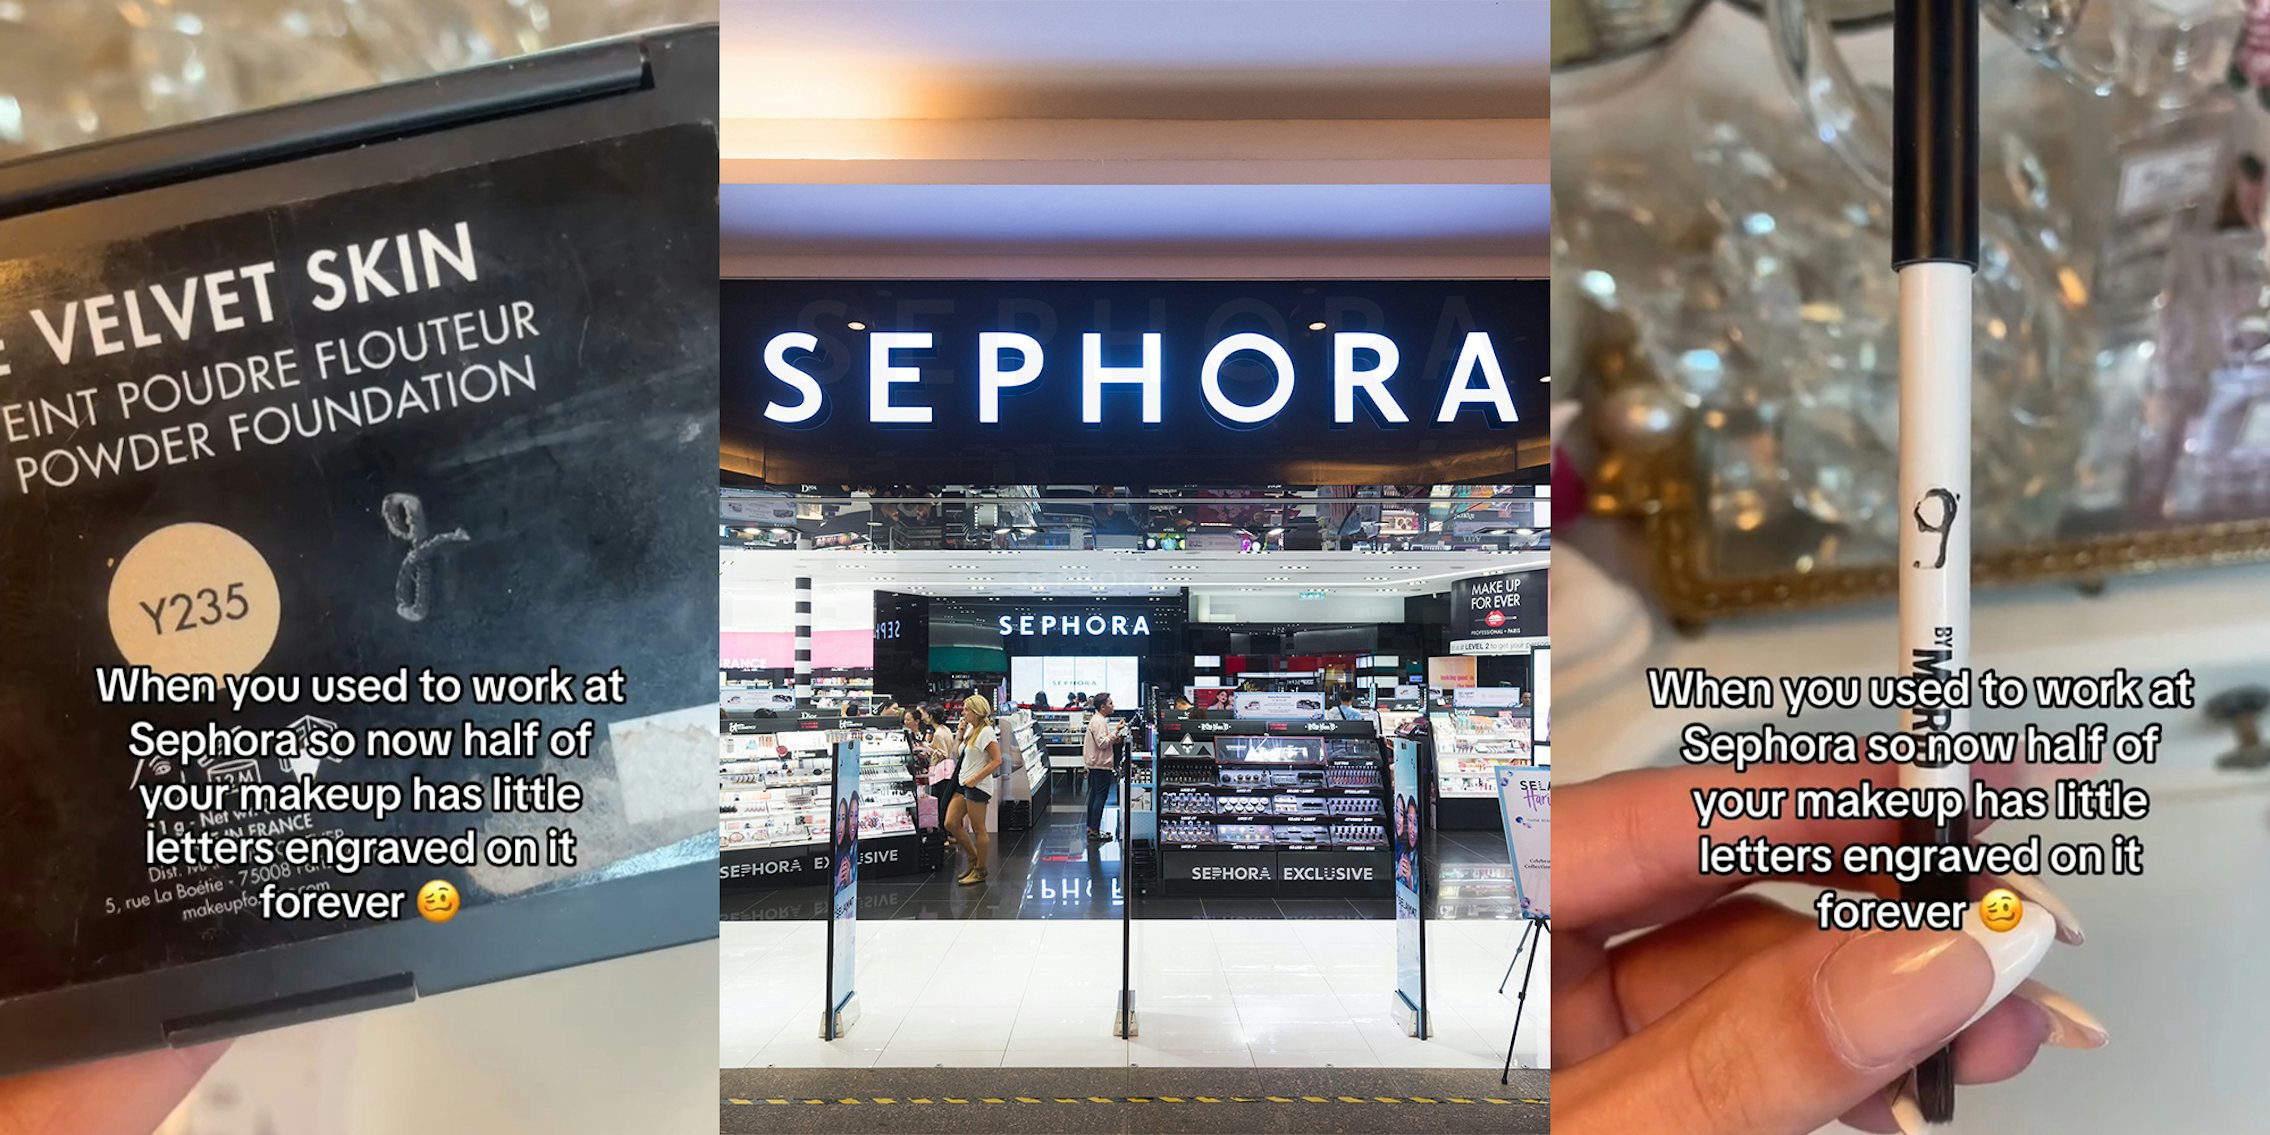 Sephora employee shares how all her makeup had to be engraved with letters. It's a loss-prevention tactic